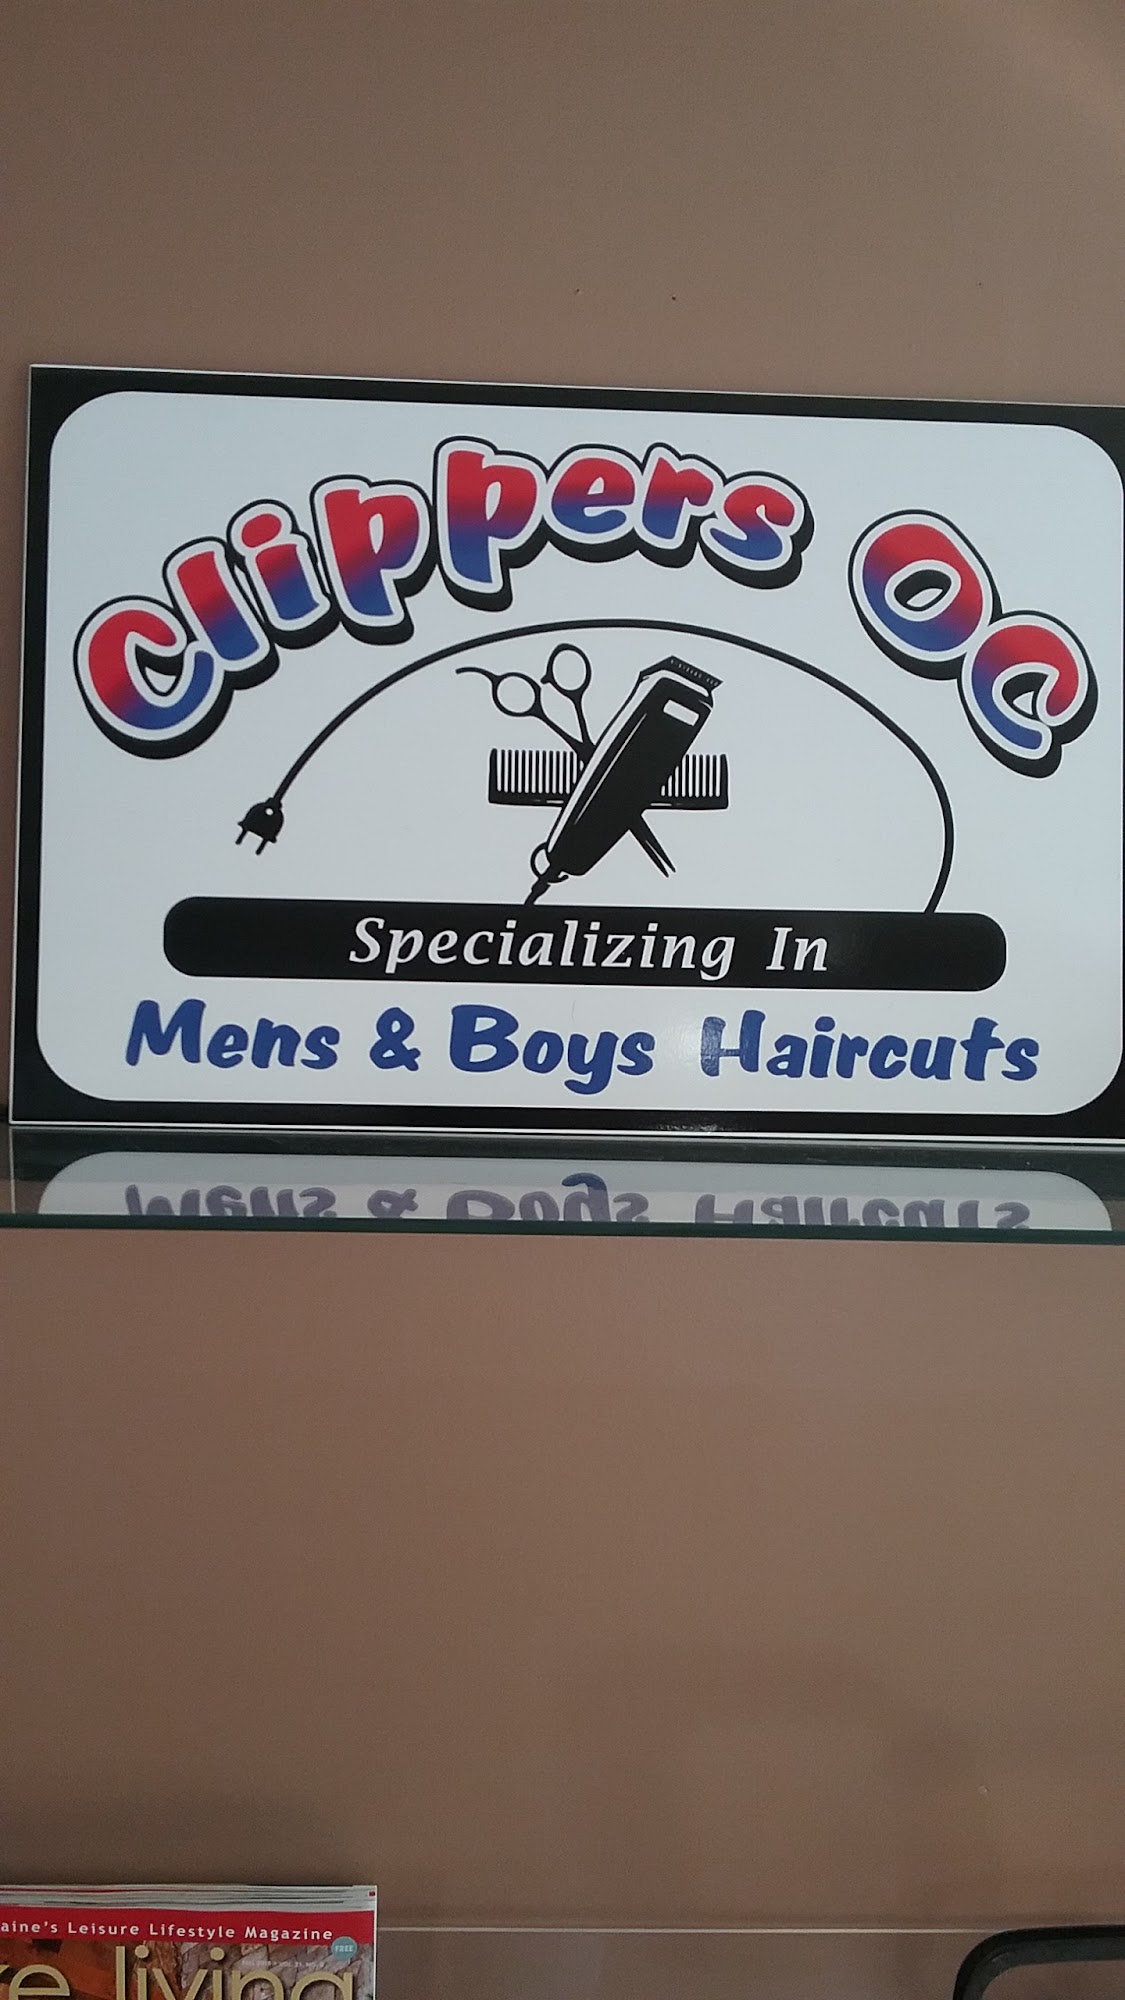 Clippers OC 314 Roosevelt Trail, Casco Maine 04015